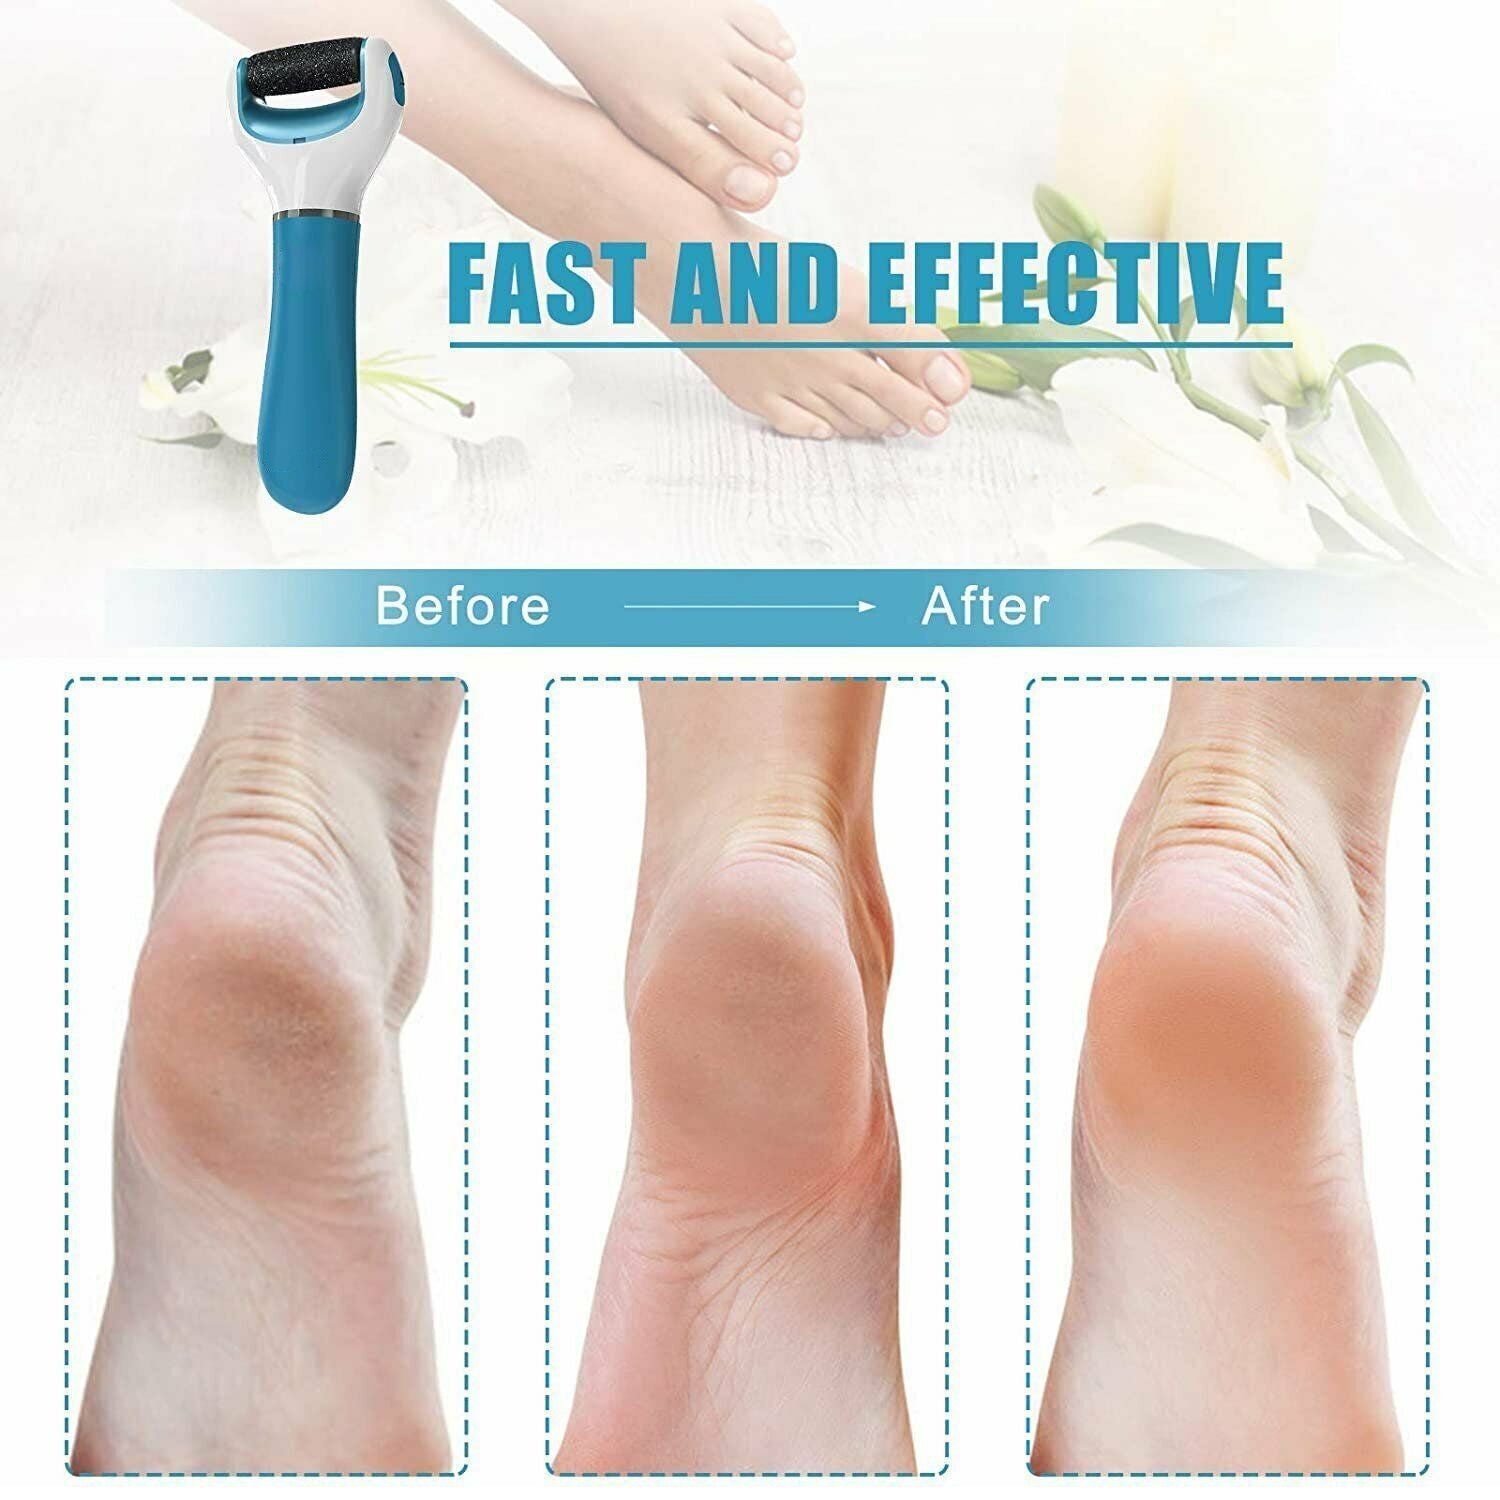 0229 Electronic Dry Foot File, Callous Remover for Feet, Electric Foot with Roller Hard and Dead Skin- Regular Coarse, Baby smooth feet in minutes. For in home padicure foot care, Battery Powered & USB (Battry not included)